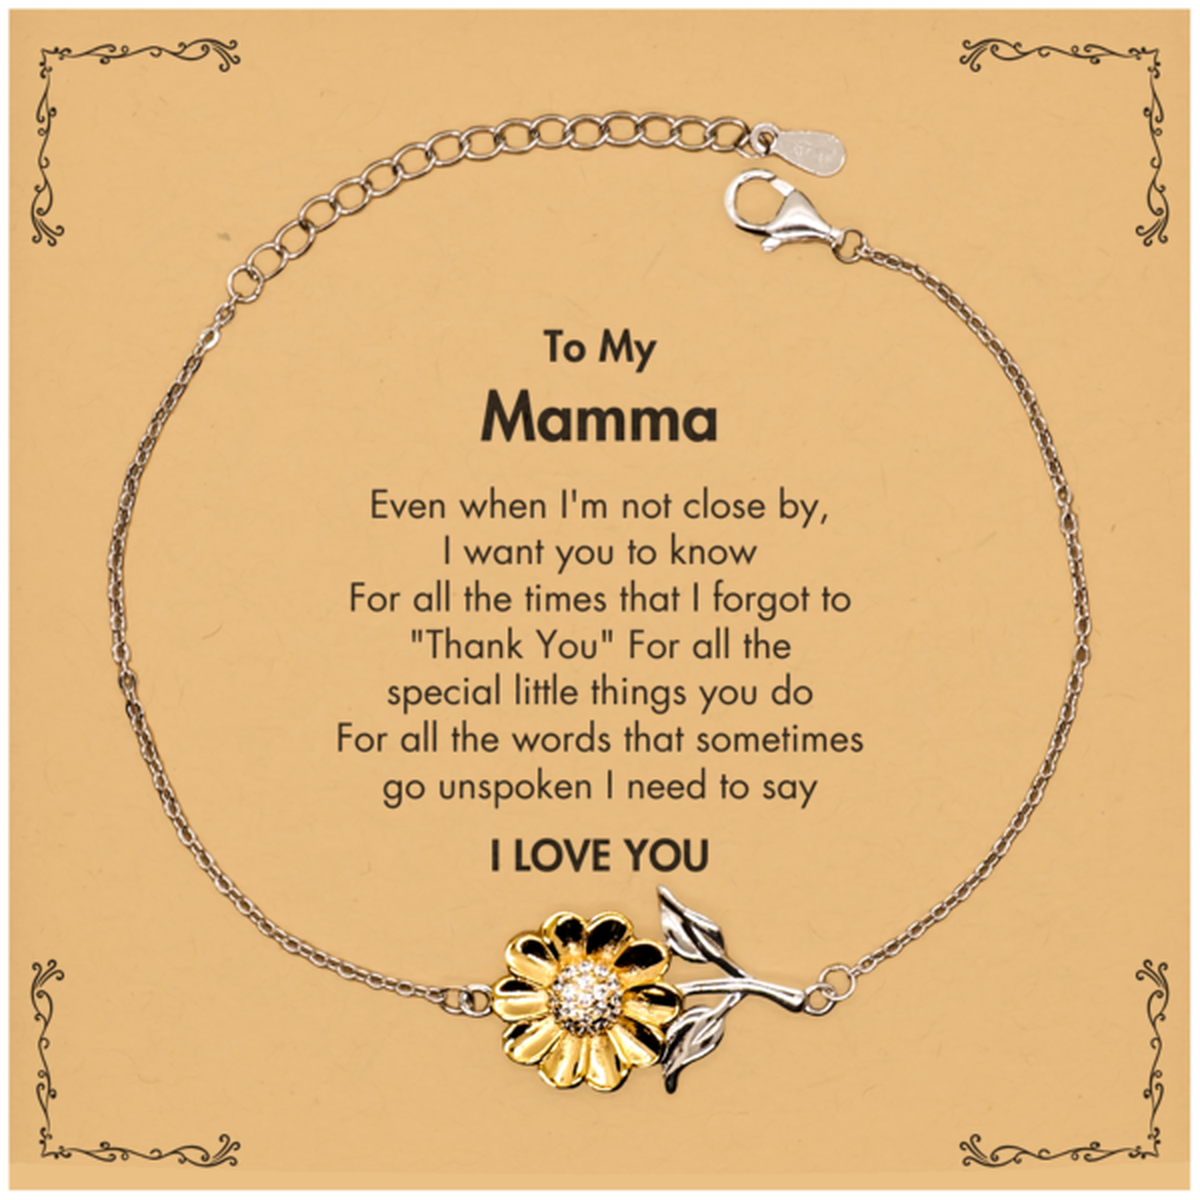 Thank You Gifts for Mamma, Keepsake Sunflower Bracelet Gifts for Mamma Birthday Mother's day Father's Day Mamma For all the words That sometimes go unspoken I need to say I LOVE YOU